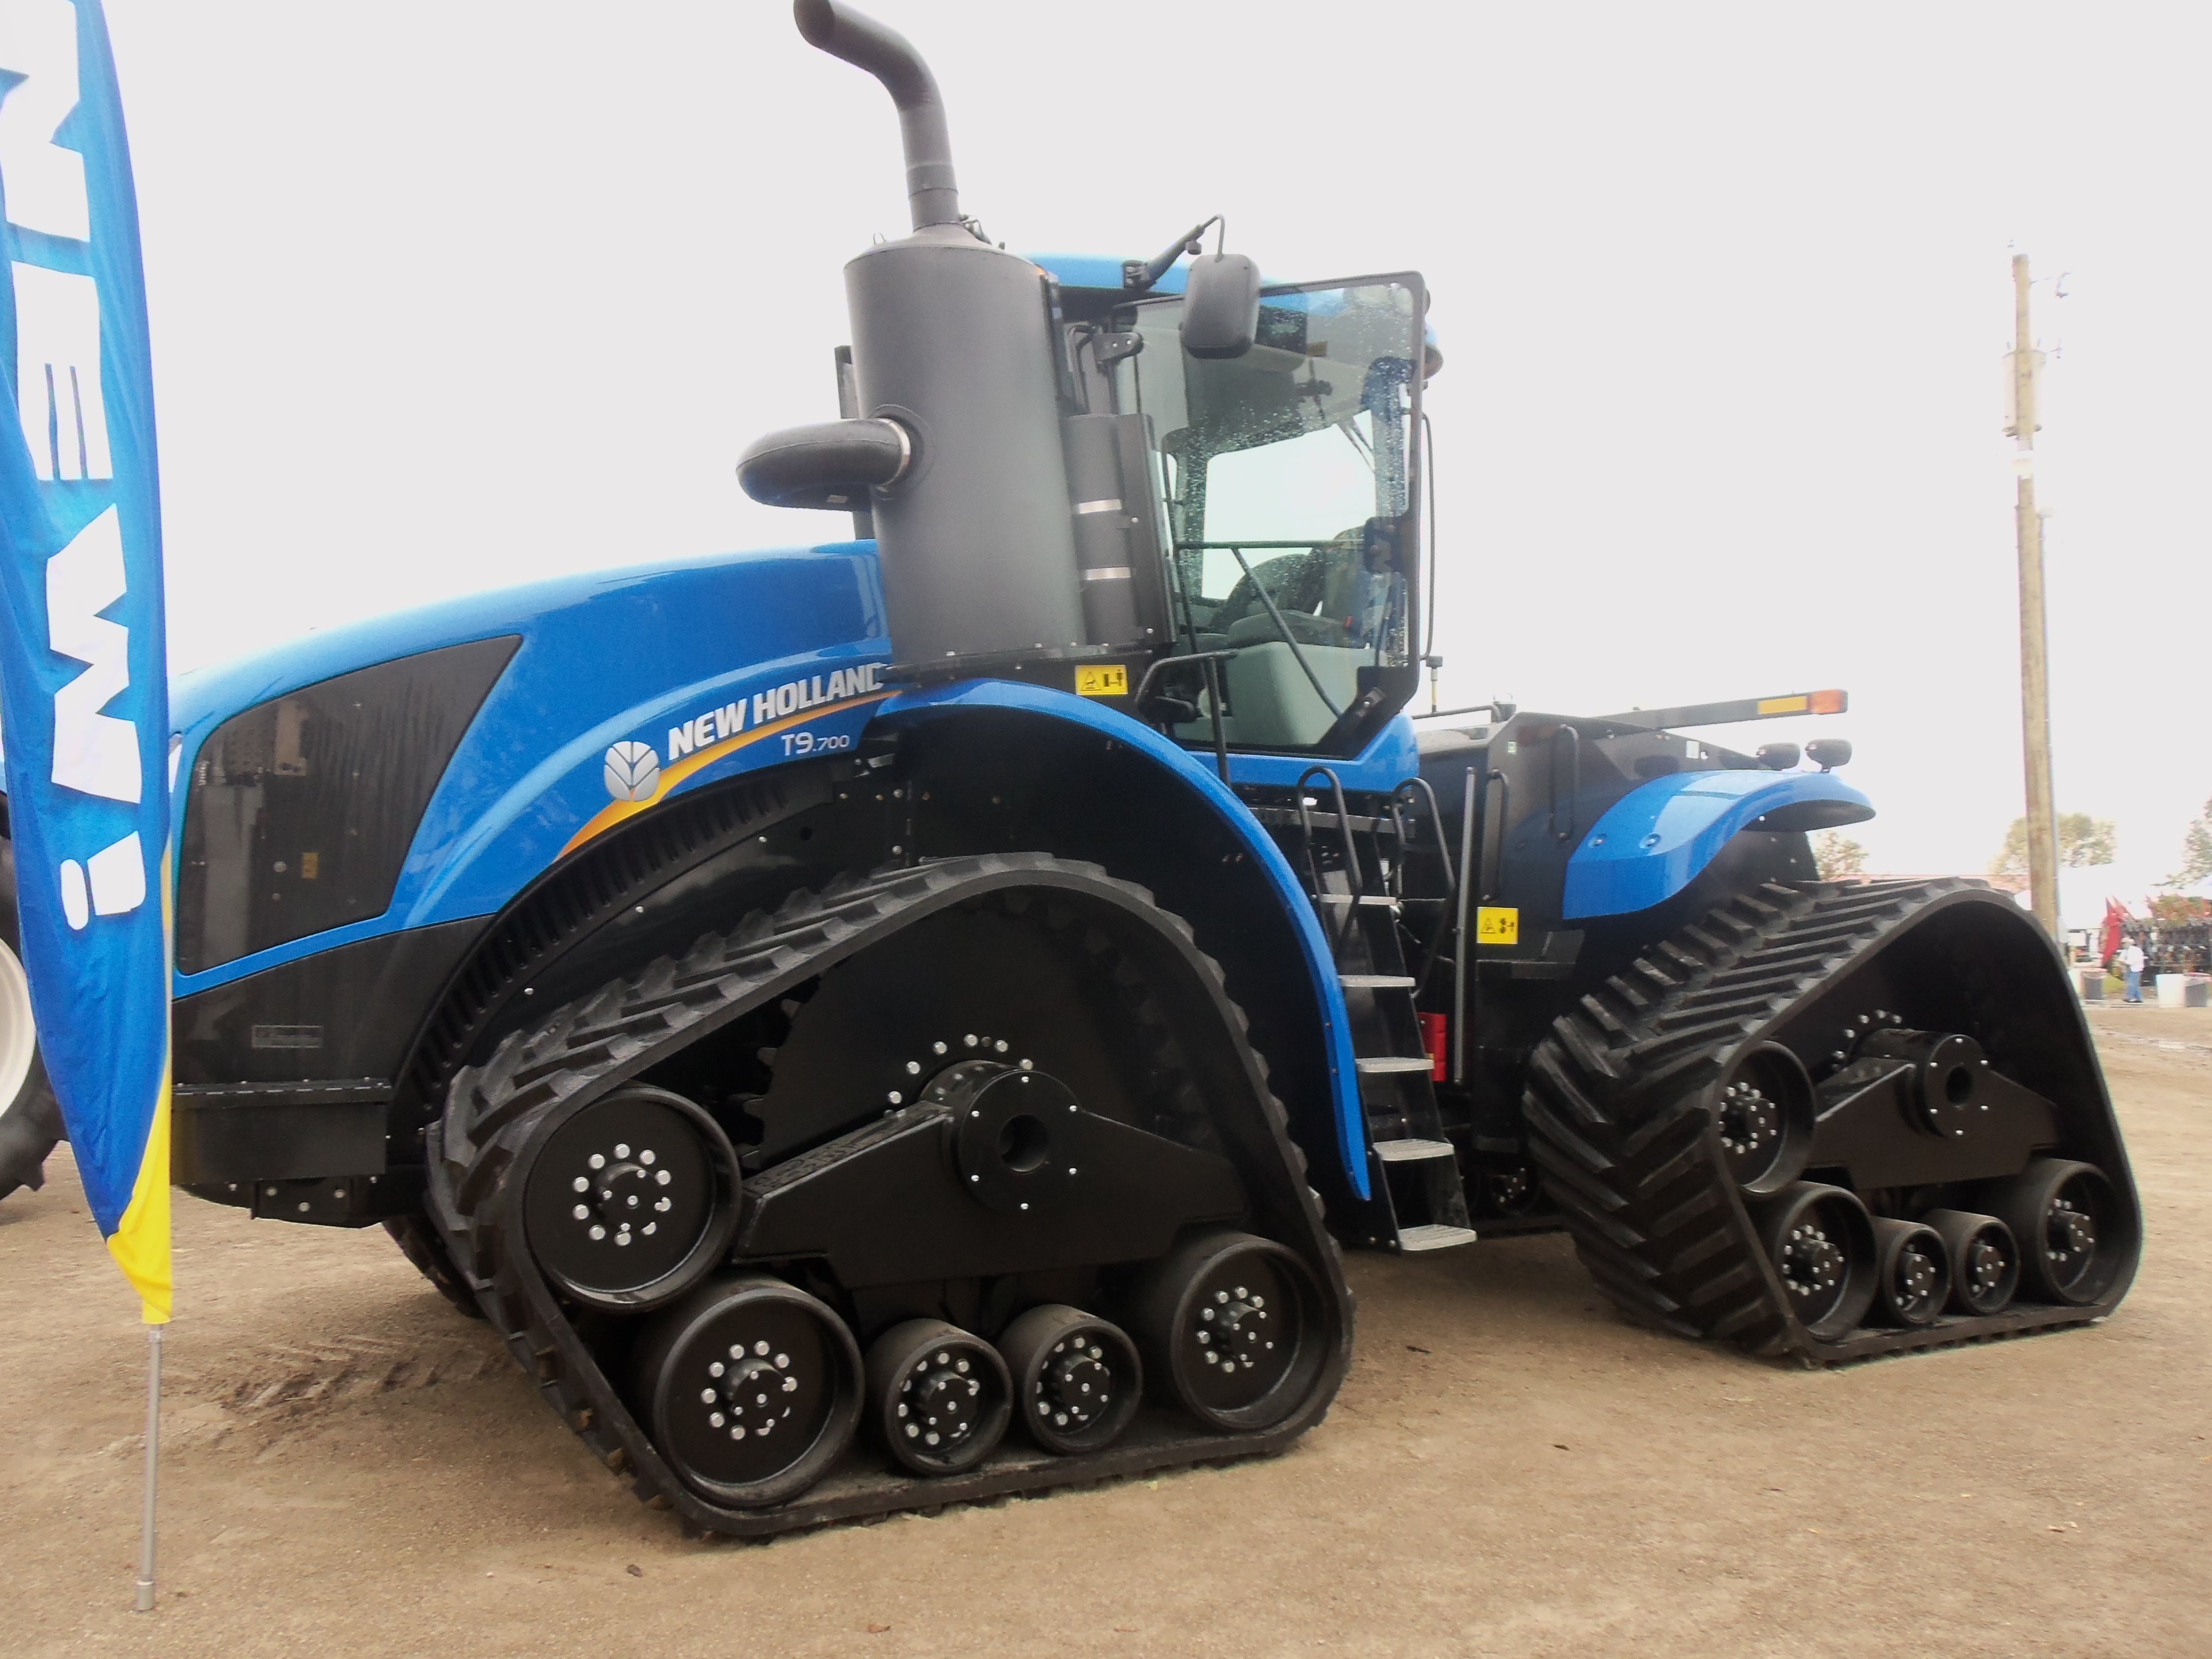 Images of New Holland Tractor | 4288x3216